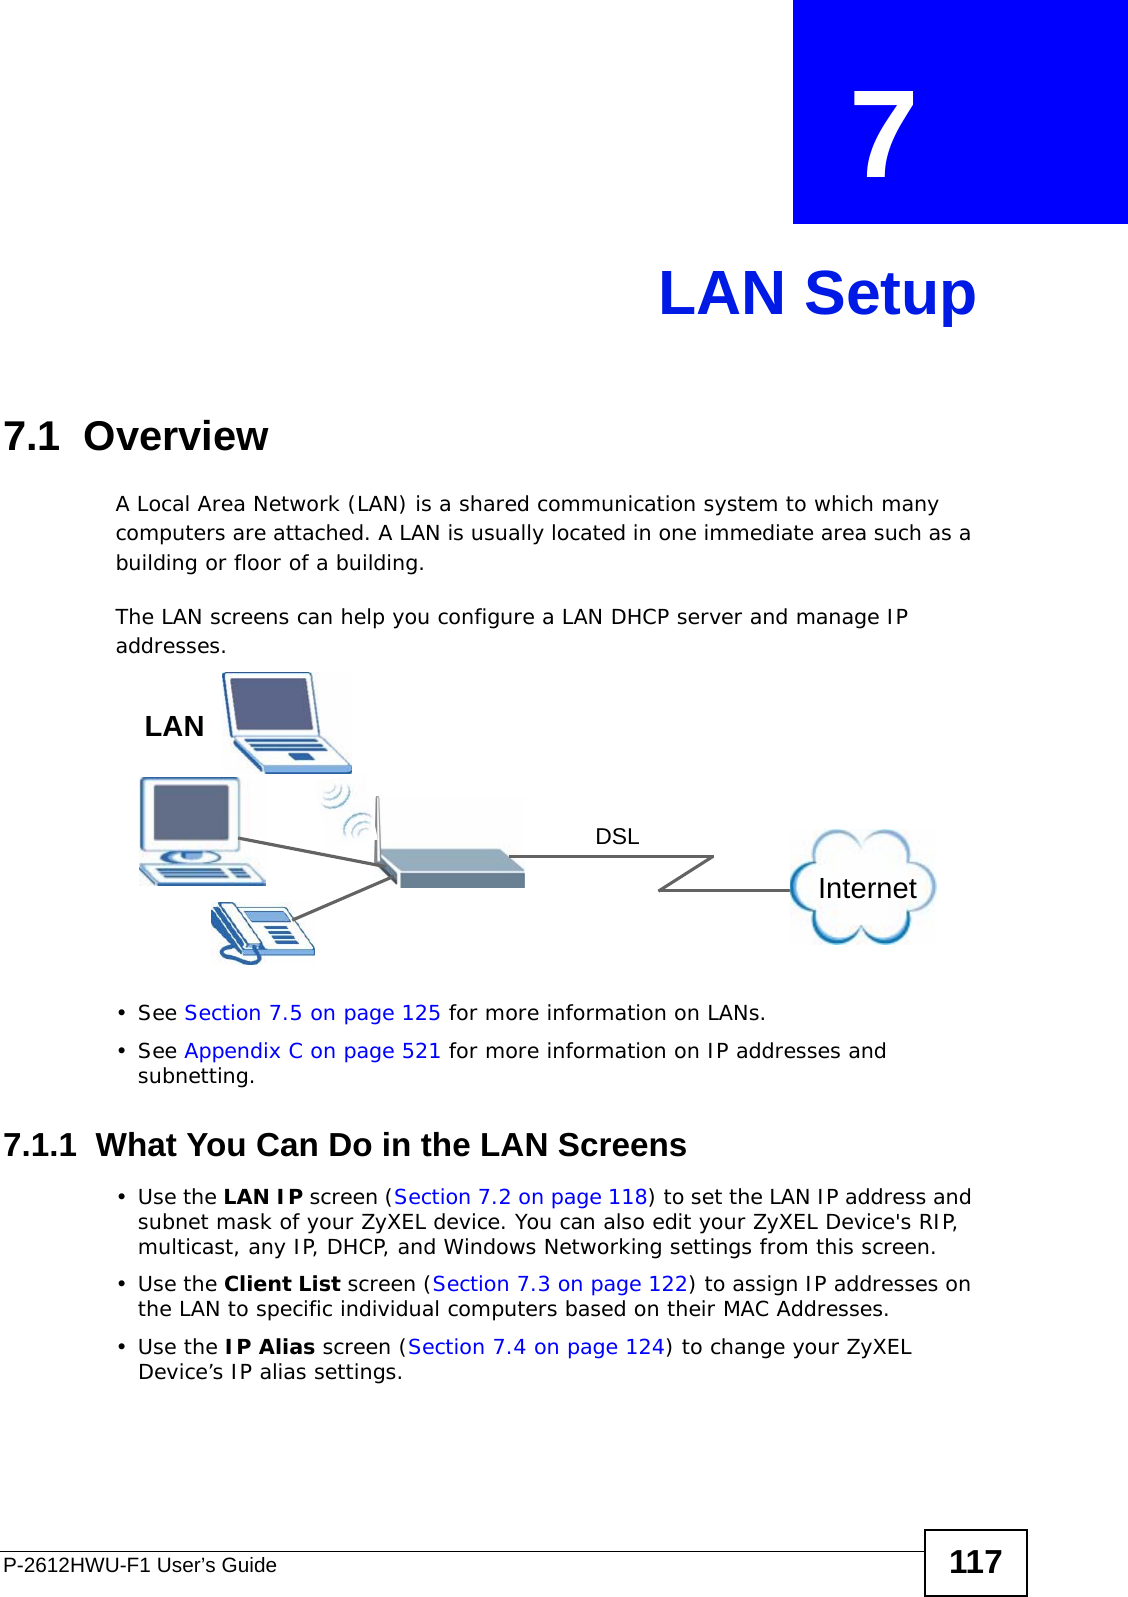 P-2612HWU-F1 User’s Guide 117CHAPTER  7 LAN Setup7.1  Overview  A Local Area Network (LAN) is a shared communication system to which many computers are attached. A LAN is usually located in one immediate area such as a building or floor of a building.The LAN screens can help you configure a LAN DHCP server and manage IP addresses.• See Section 7.5 on page 125 for more information on LANs.• See Appendix C on page 521 for more information on IP addresses and subnetting.7.1.1  What You Can Do in the LAN Screens•Use the LAN IP screen (Section 7.2 on page 118) to set the LAN IP address and subnet mask of your ZyXEL device. You can also edit your ZyXEL Device&apos;s RIP, multicast, any IP, DHCP, and Windows Networking settings from this screen.•Use the Client List screen (Section 7.3 on page 122) to assign IP addresses on the LAN to specific individual computers based on their MAC Addresses. •Use the IP Alias screen (Section 7.4 on page 124) to change your ZyXEL Device’s IP alias settings.InternetDSLLAN